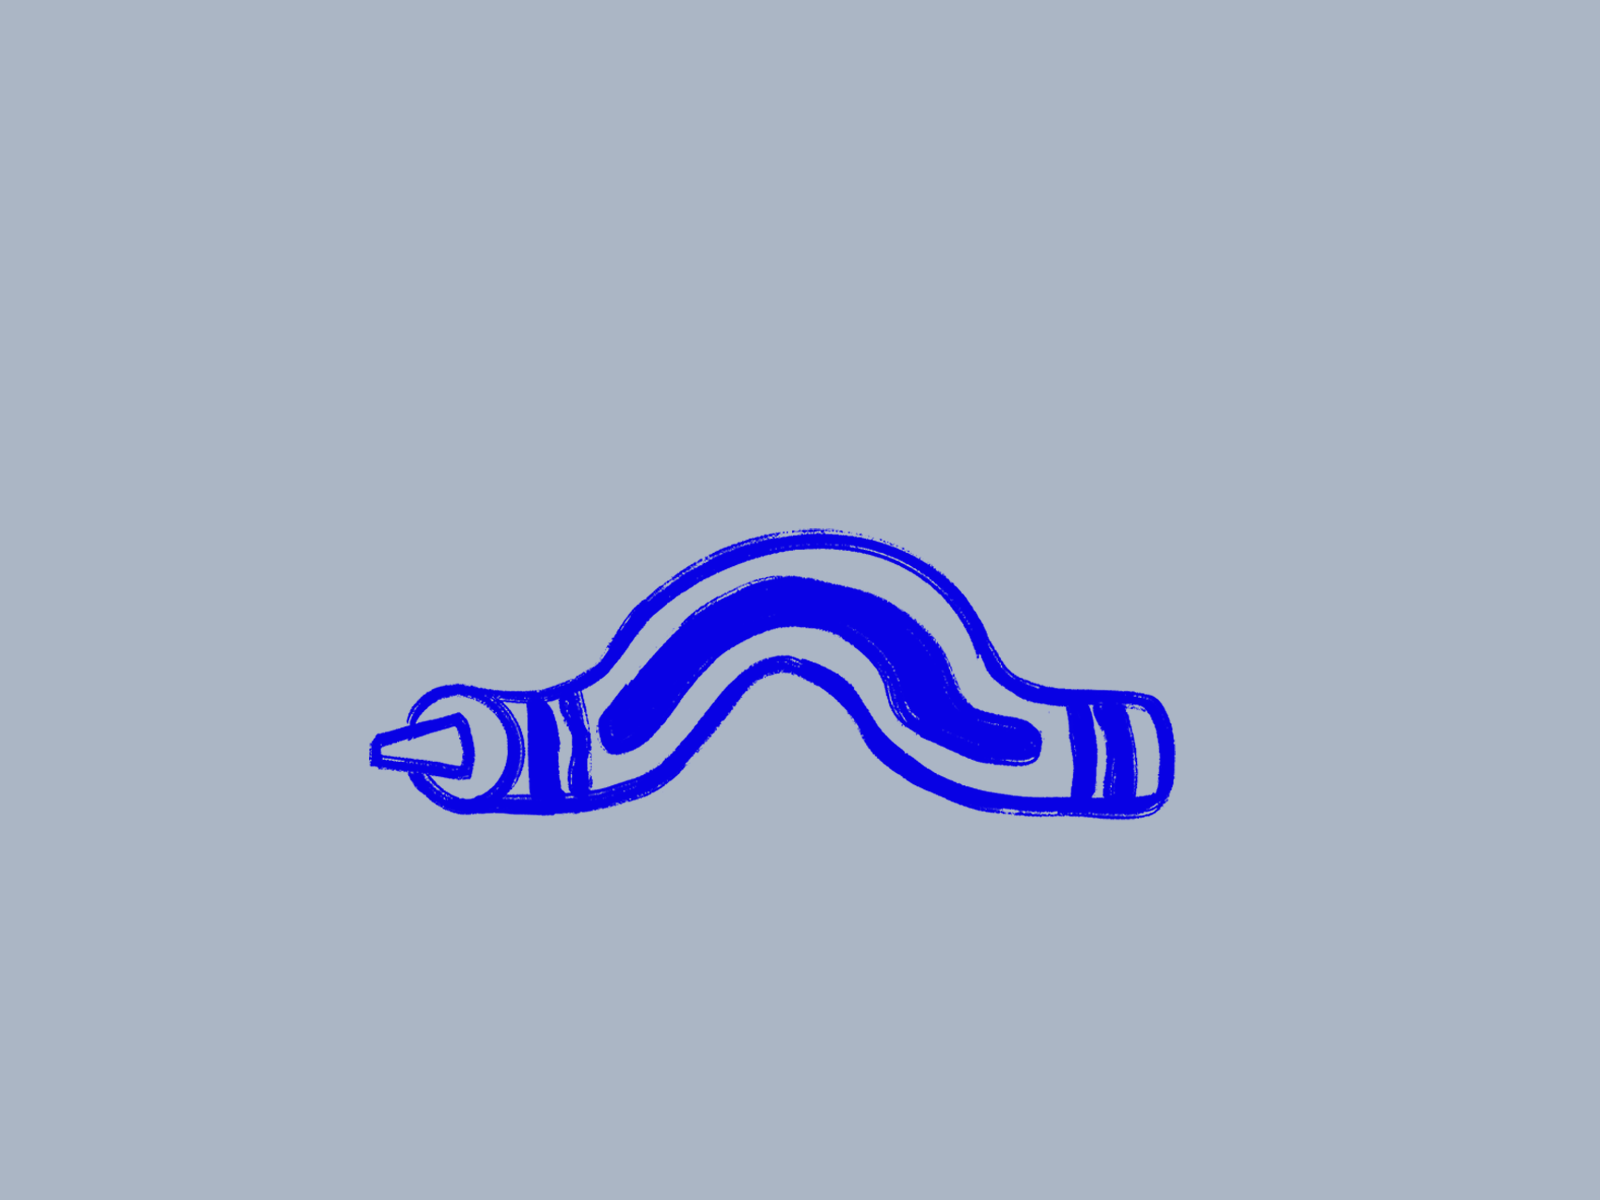 Azulcrayola animation blue character crayola crayon design frame by frame frame to frame gif illustration loop pen pencil trail